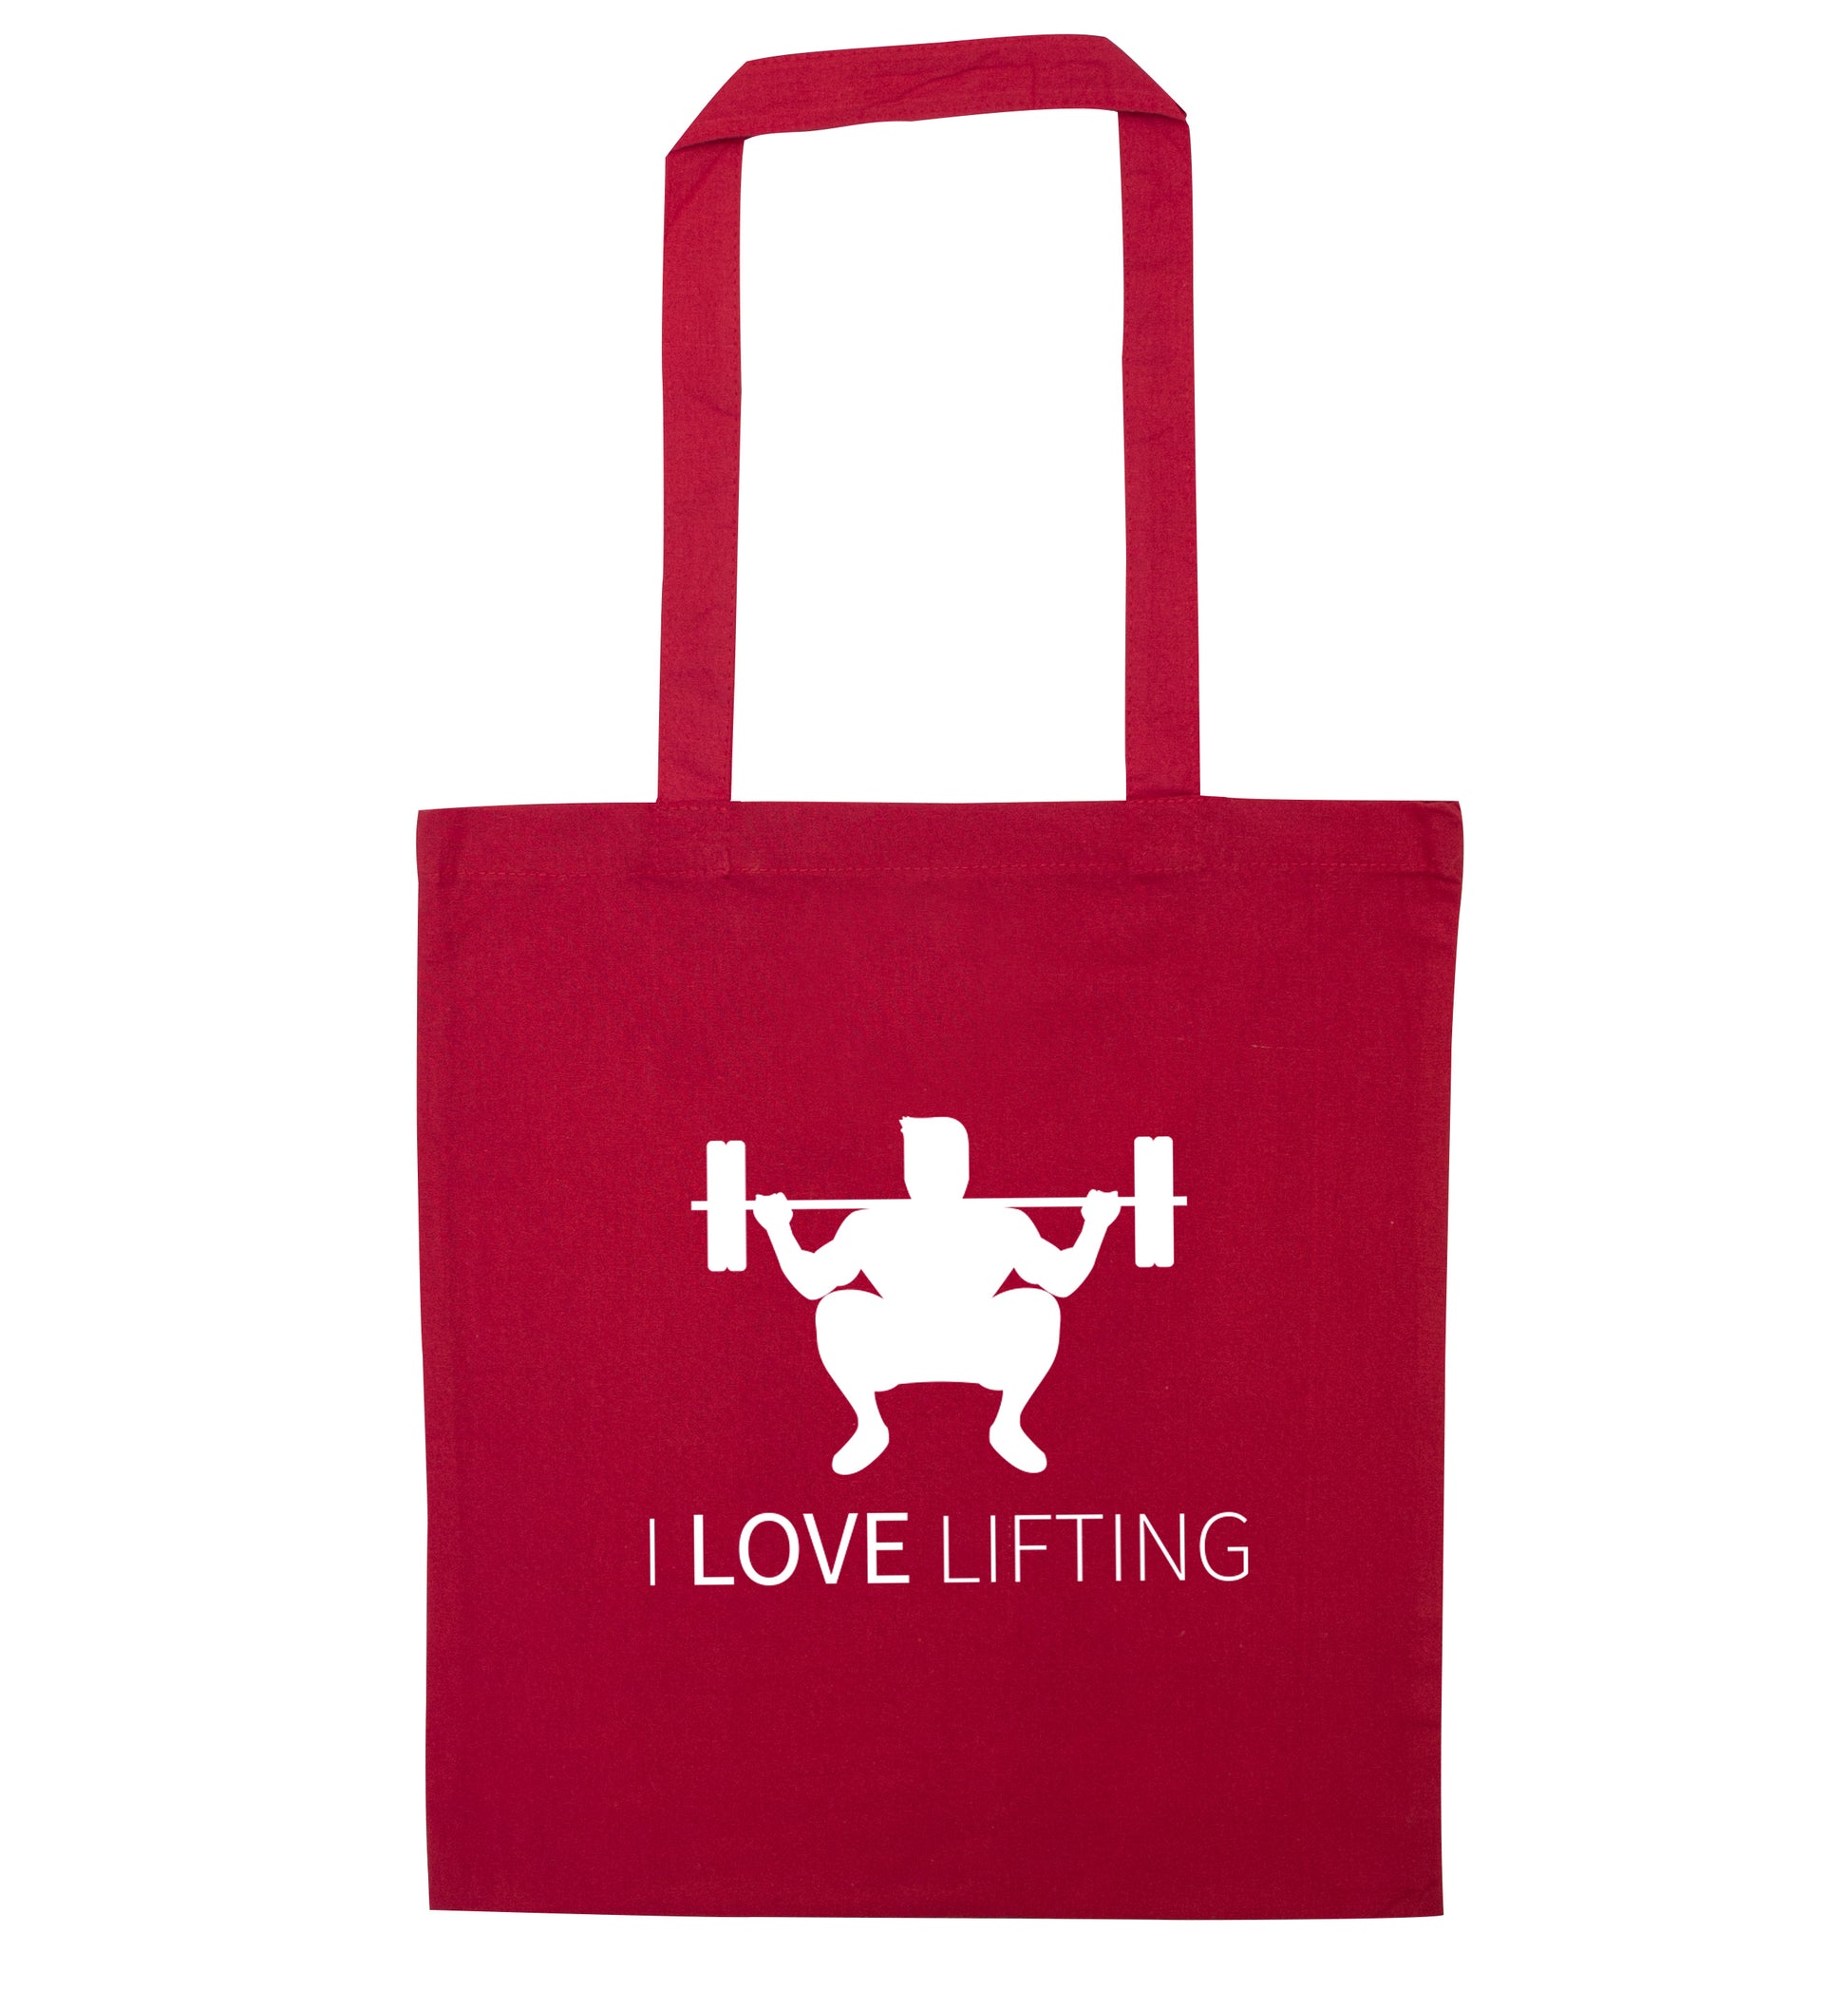 I Love Lifting red tote bag